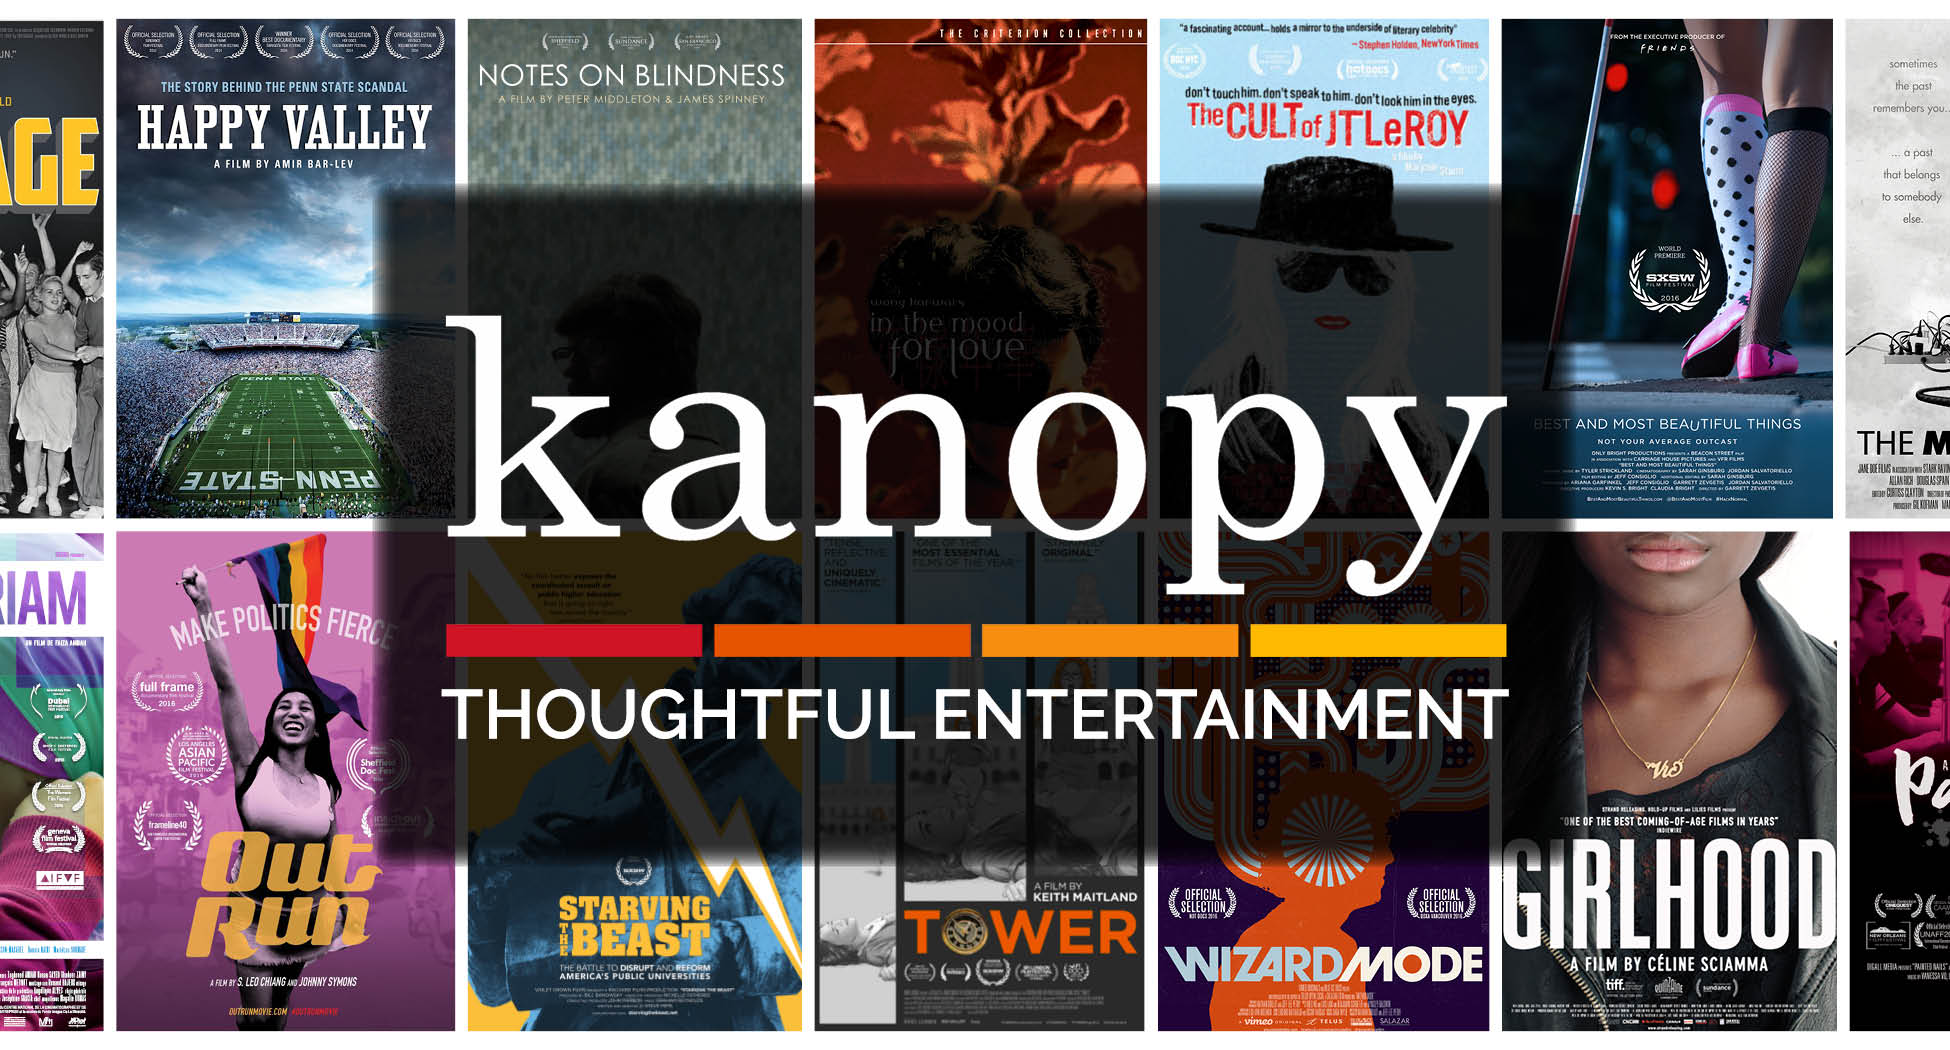 Kanopy - FREE on demand Video Streaming Service